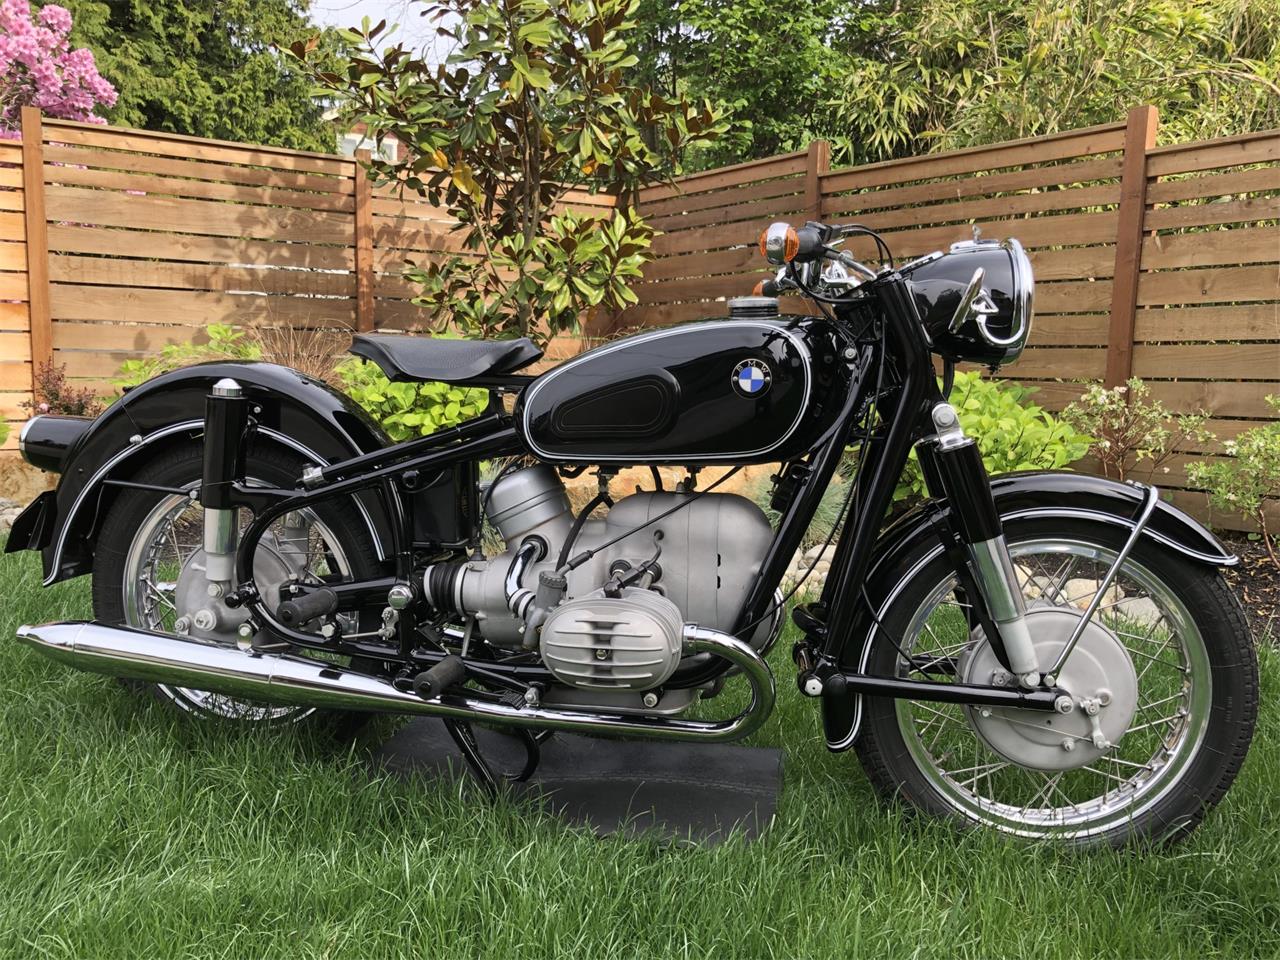 1962 BMW Motorcycle for Sale | ClassicCars.com | CC-1246328